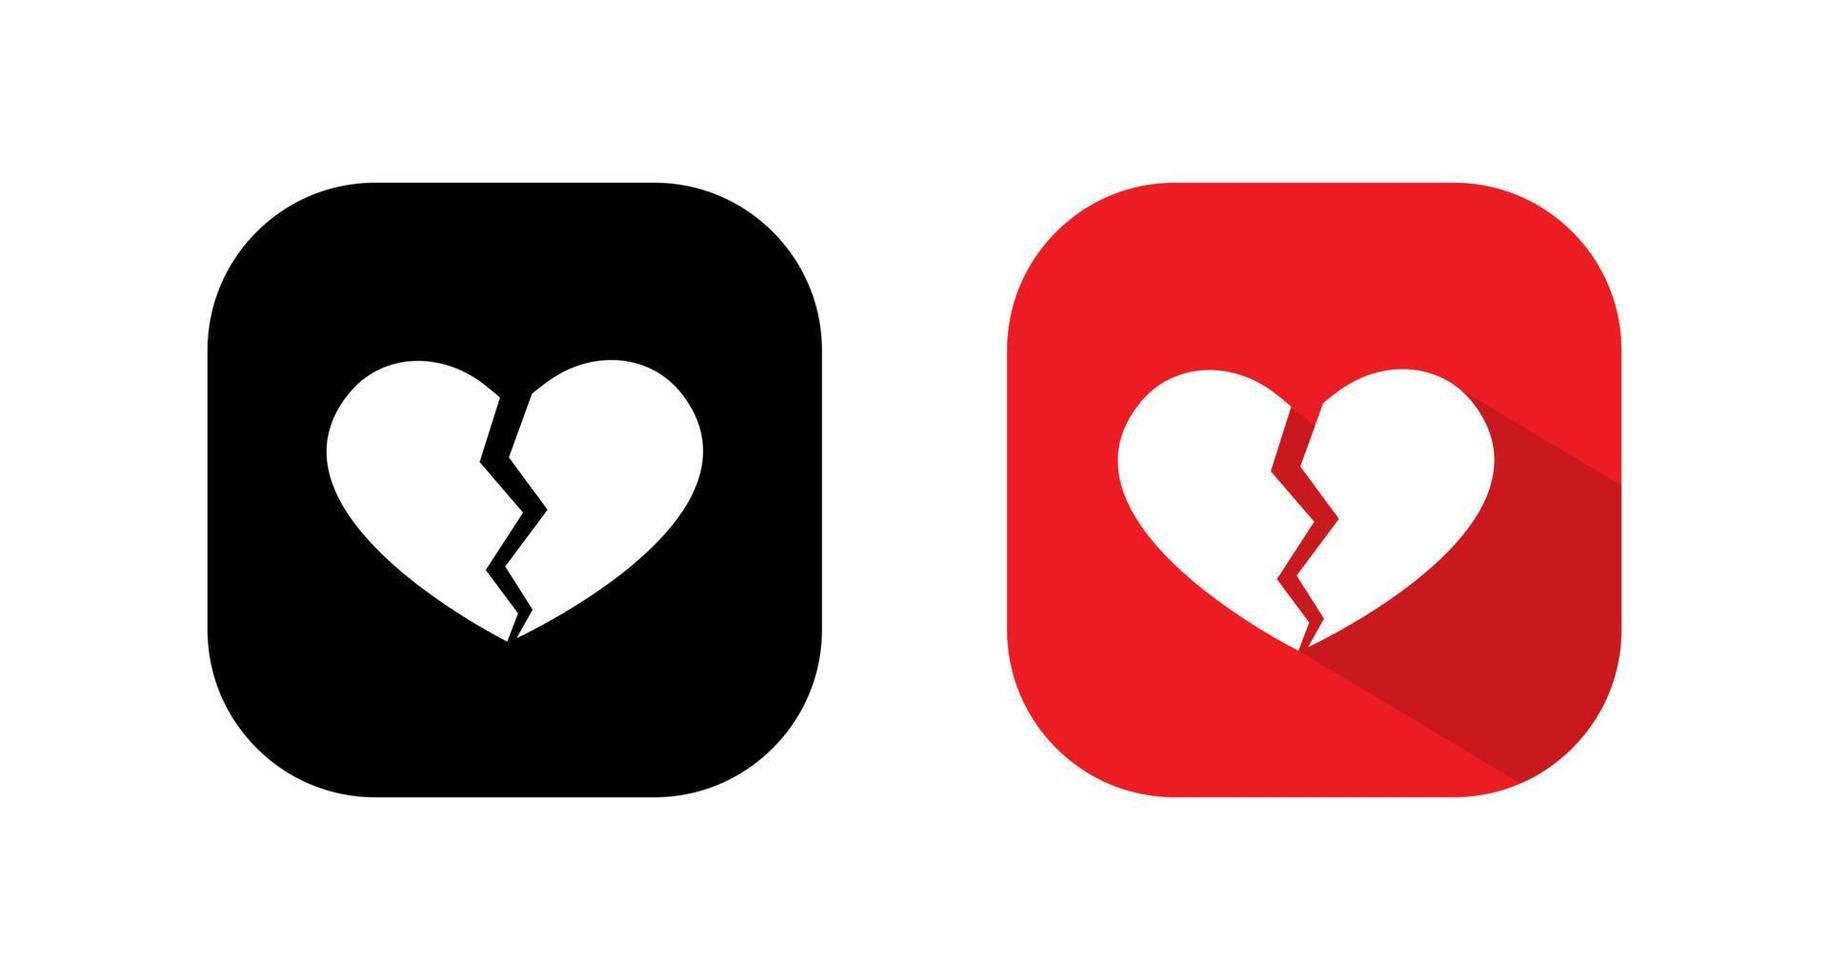 Broken heart, divorce icon vector isolated on square background